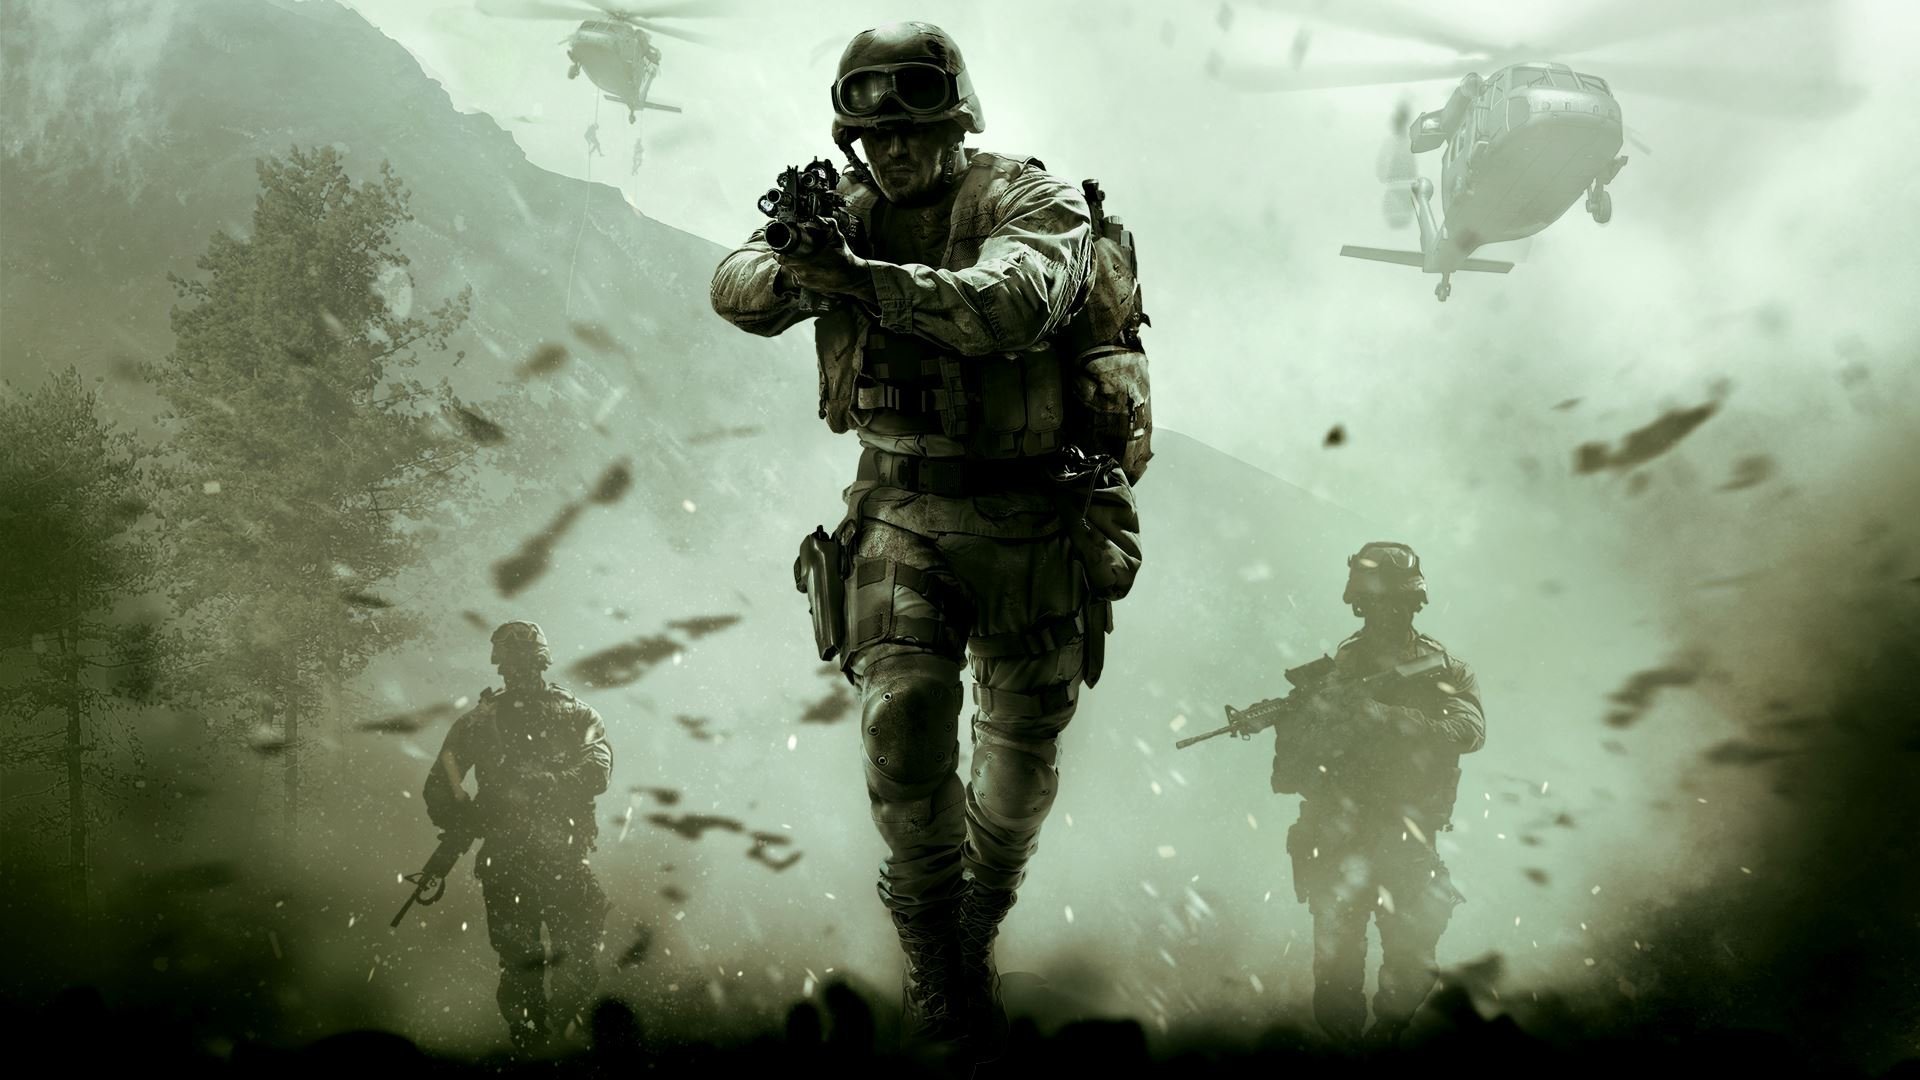 Modern Warfare 3 will instantly kill you for going off script in a mission